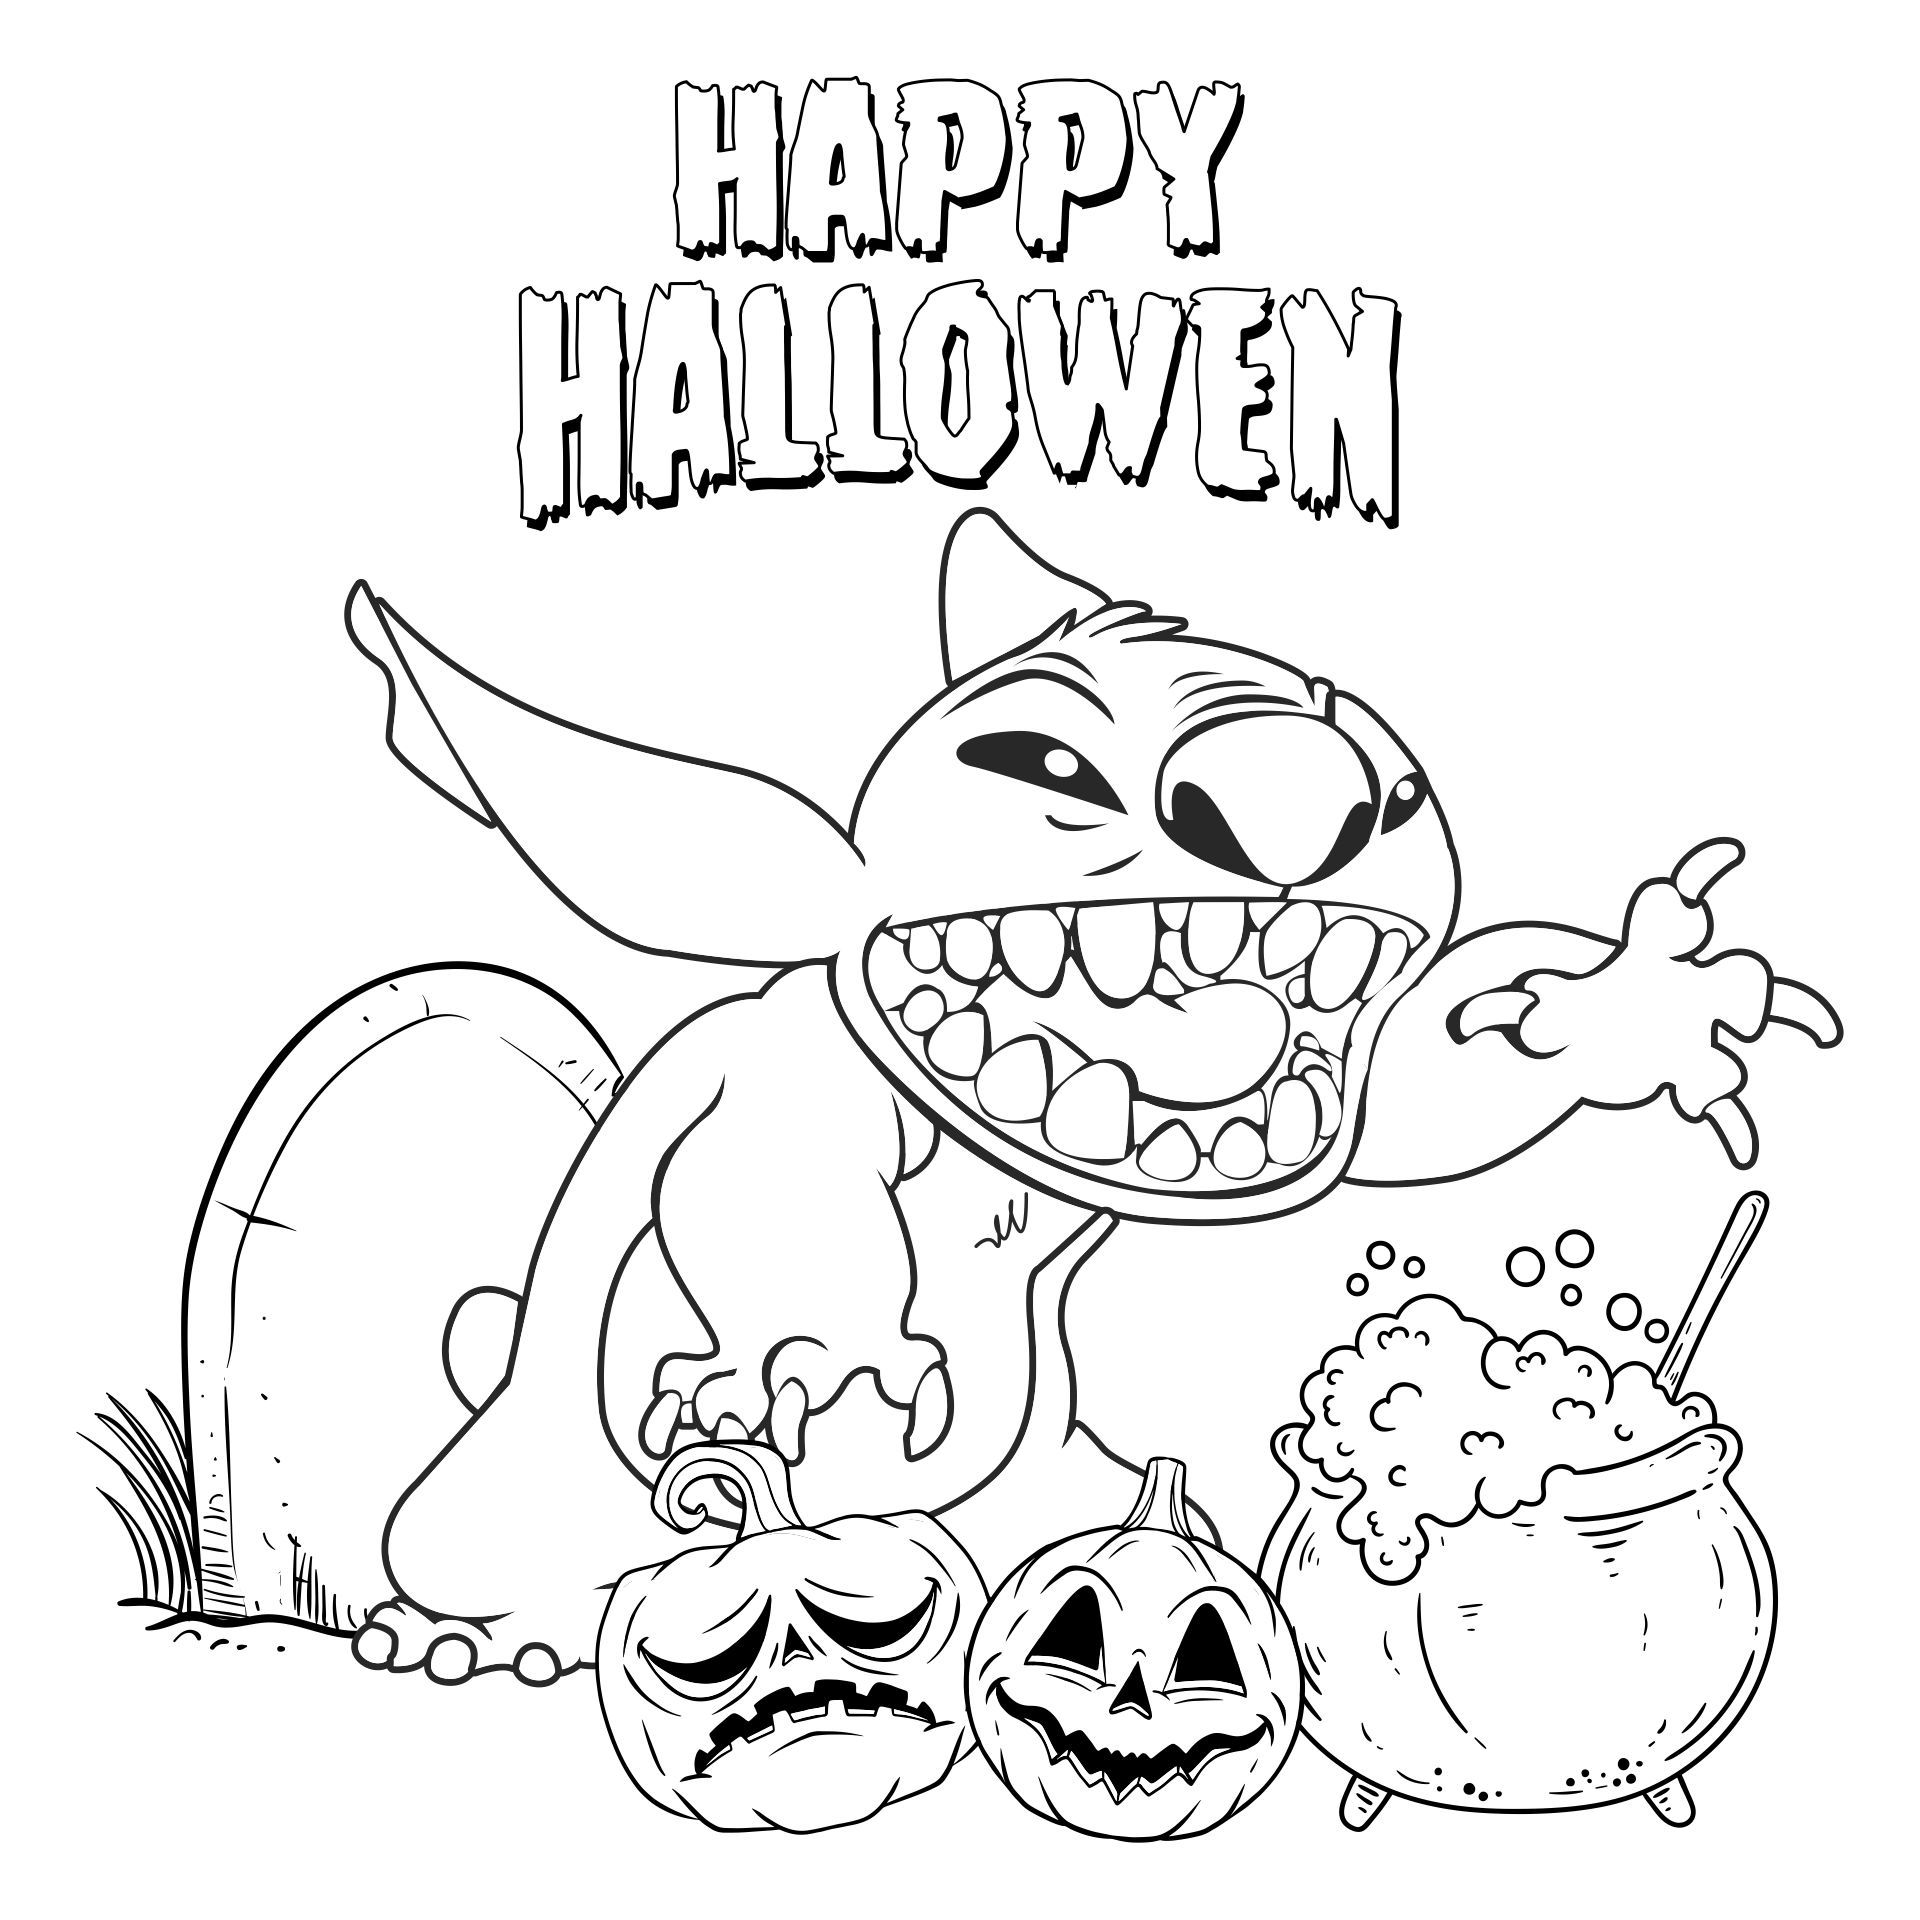 15 Best Disney Halloween Coloring Pages Printable PDF for Free at  Printablee | Halloween coloring pages, Stitch coloring pages, Disney halloween  coloring pages